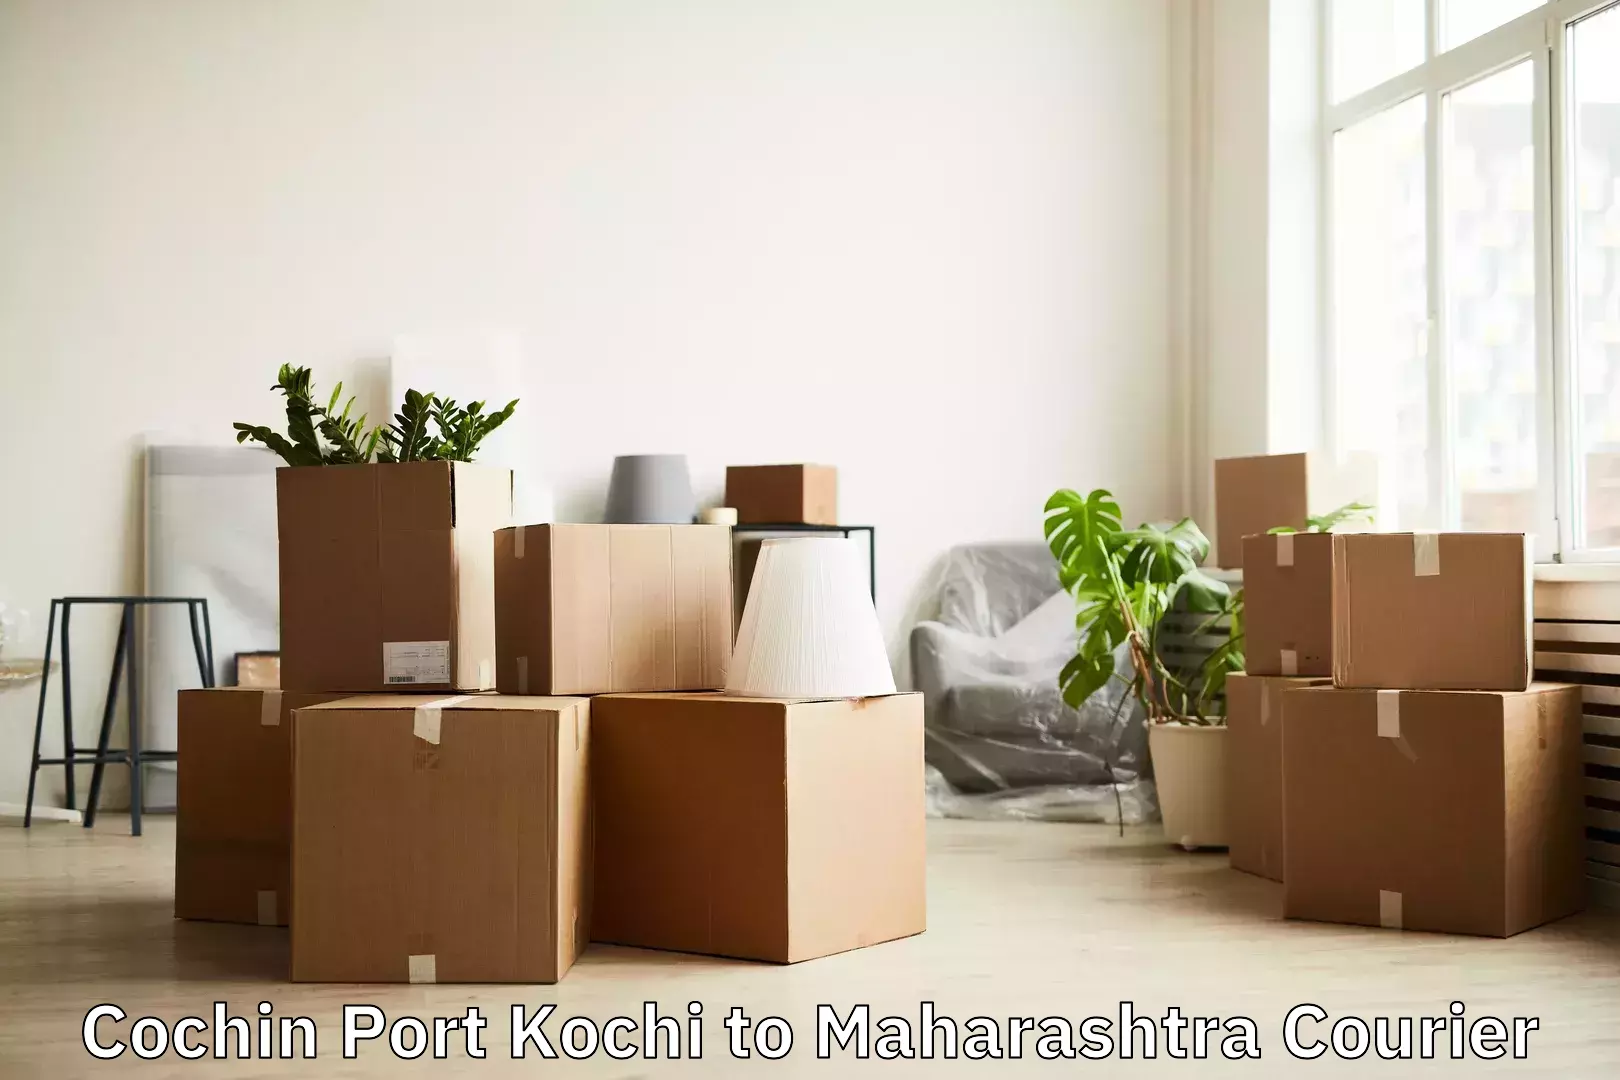 Overnight luggage courier Cochin Port Kochi to Pune